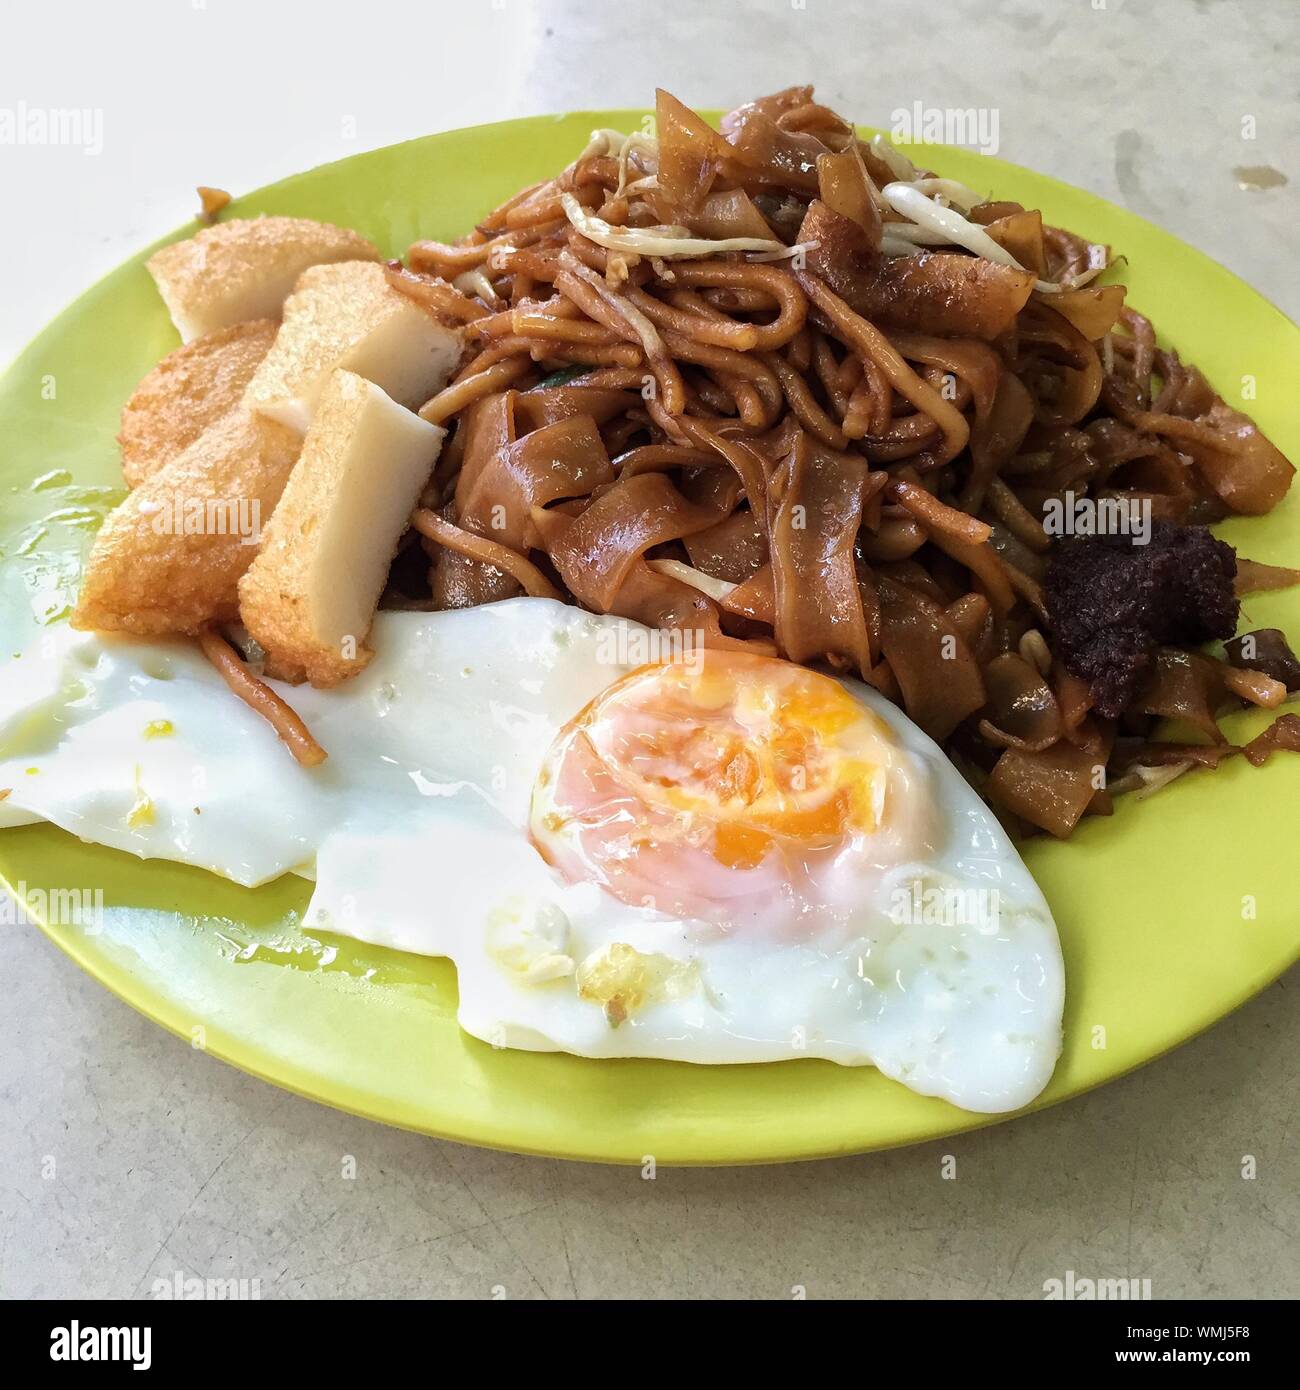 Close Up View Of Ready-to-eat Meal With Fried Egg Stock Photo